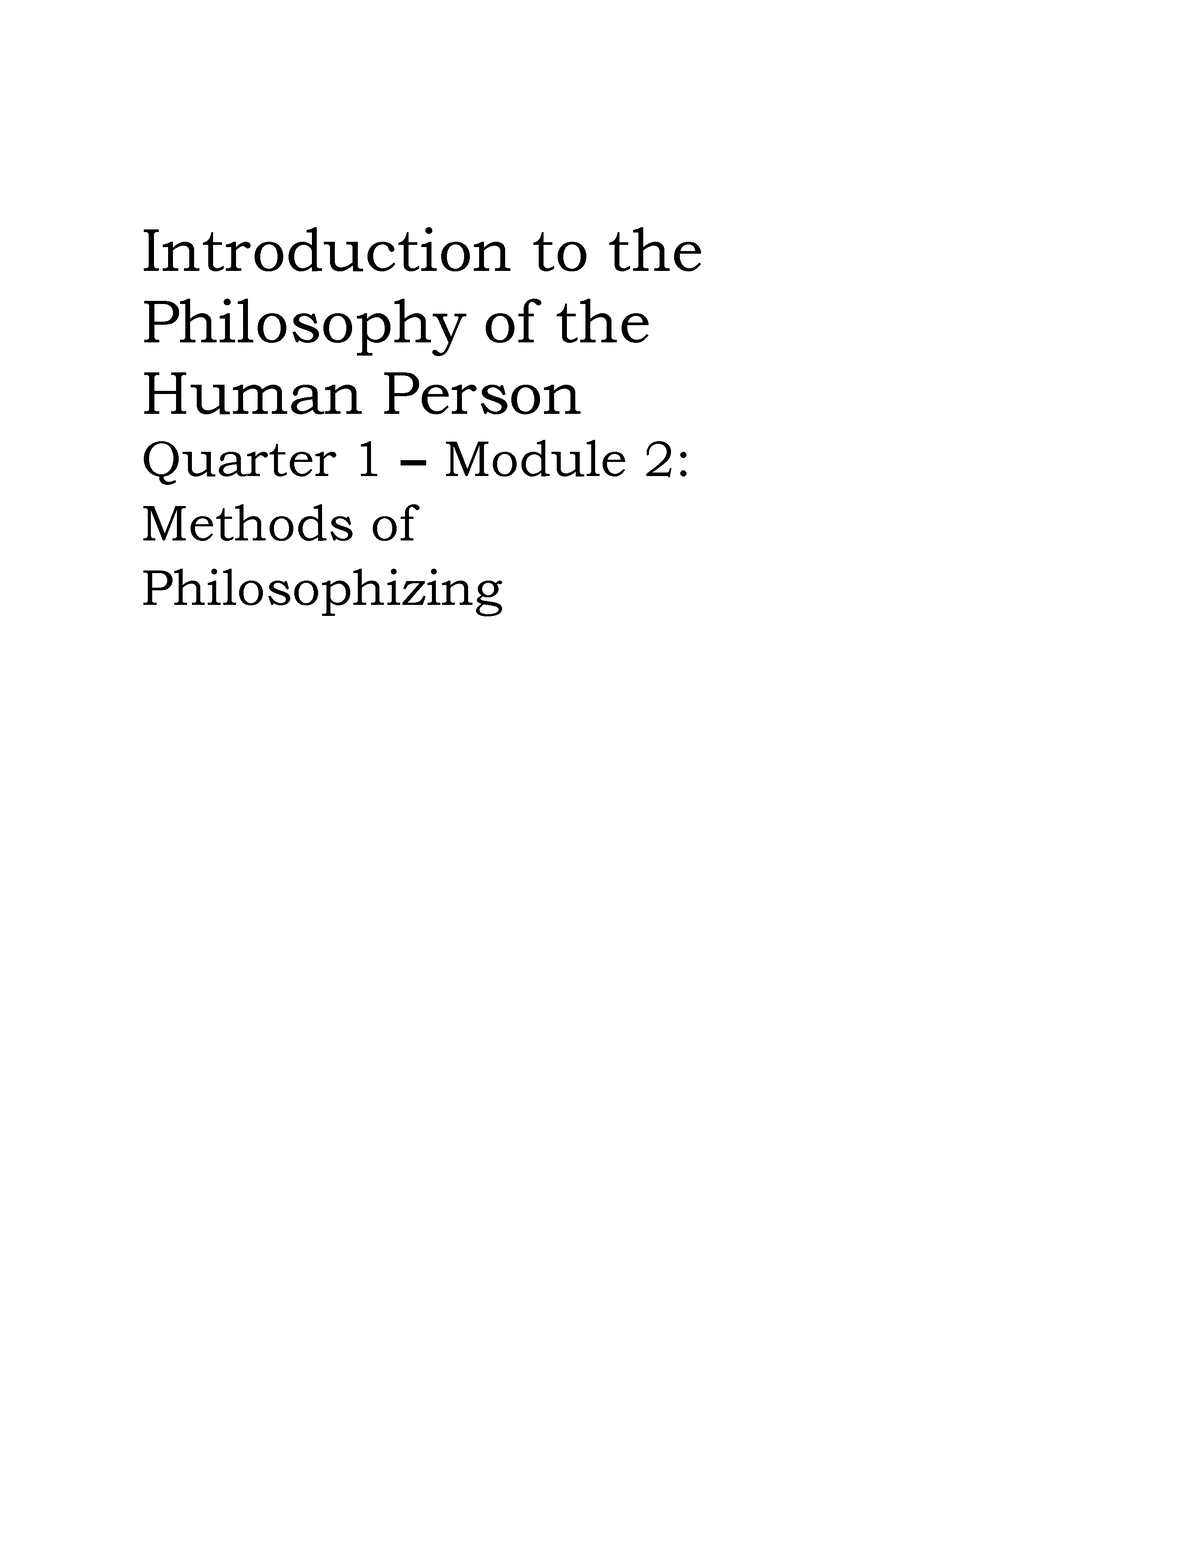 Philo Q1 Module 1 Introduction To The Philosophy Of The Human Person Quarter 1 Module 2 1732